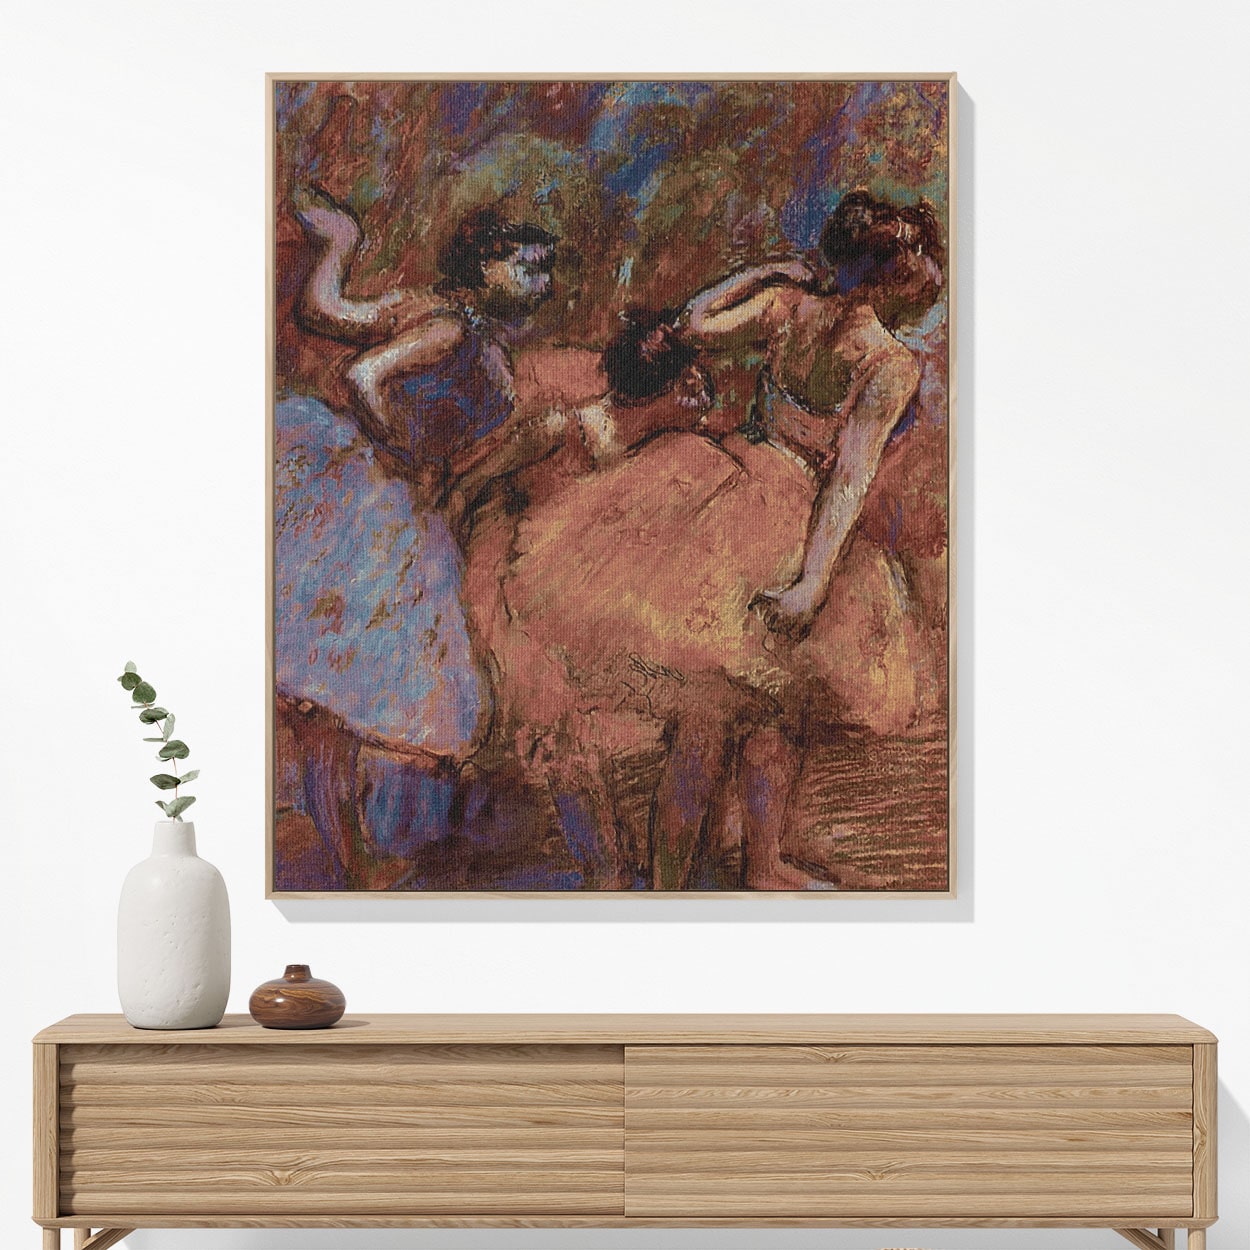 Behind the Curtain Woven Blanket Woven Blanket Hanging on a Wall as Framed Wall Art